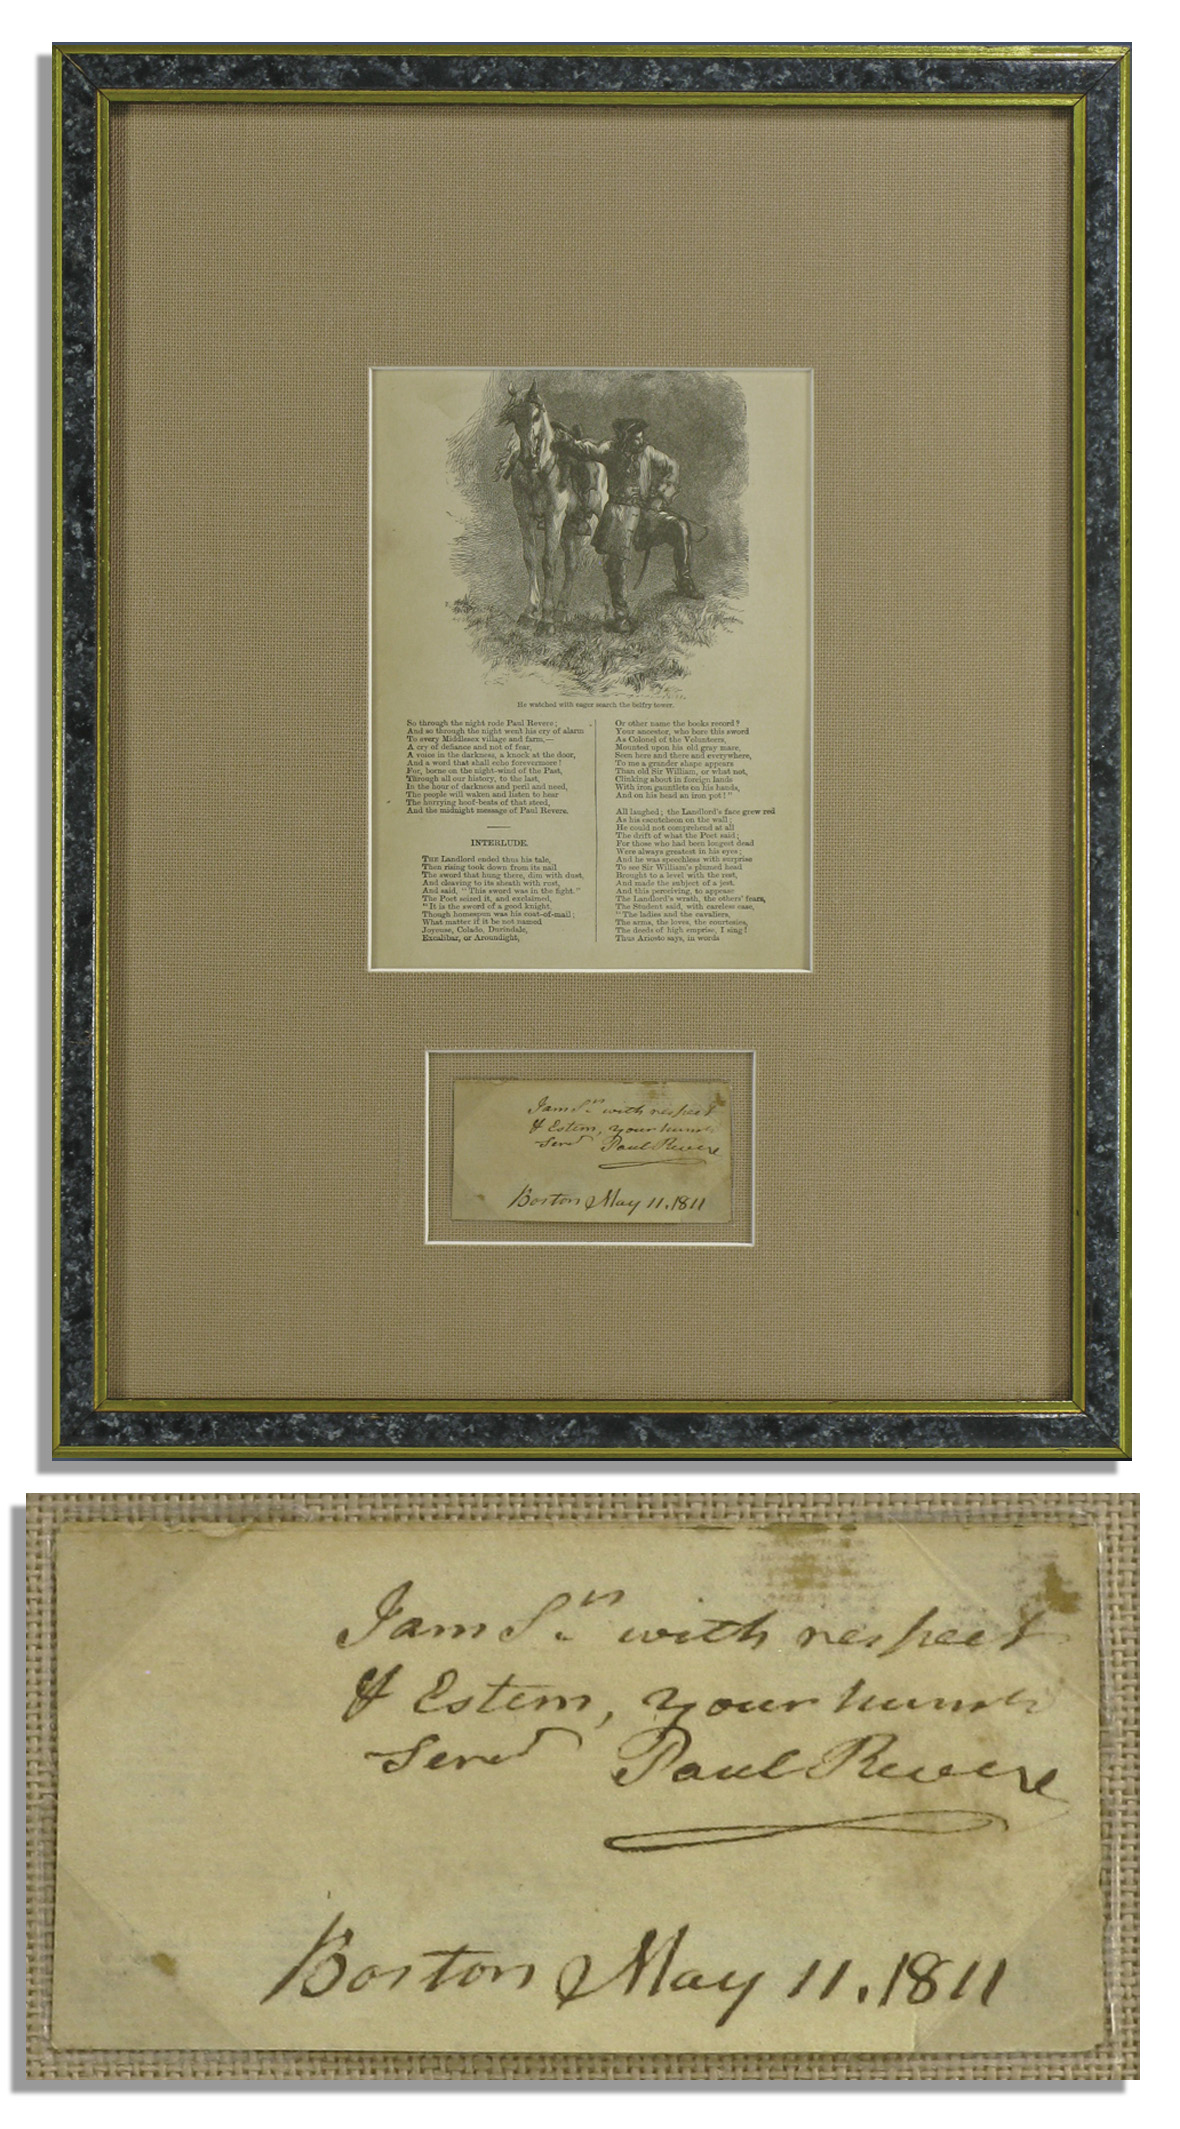 Paul Revere Autograph Paul Revere 1811 Autograph Note Signed -- Elegantly Framed With a Copy of Longfellow's Famous Poem About Revere